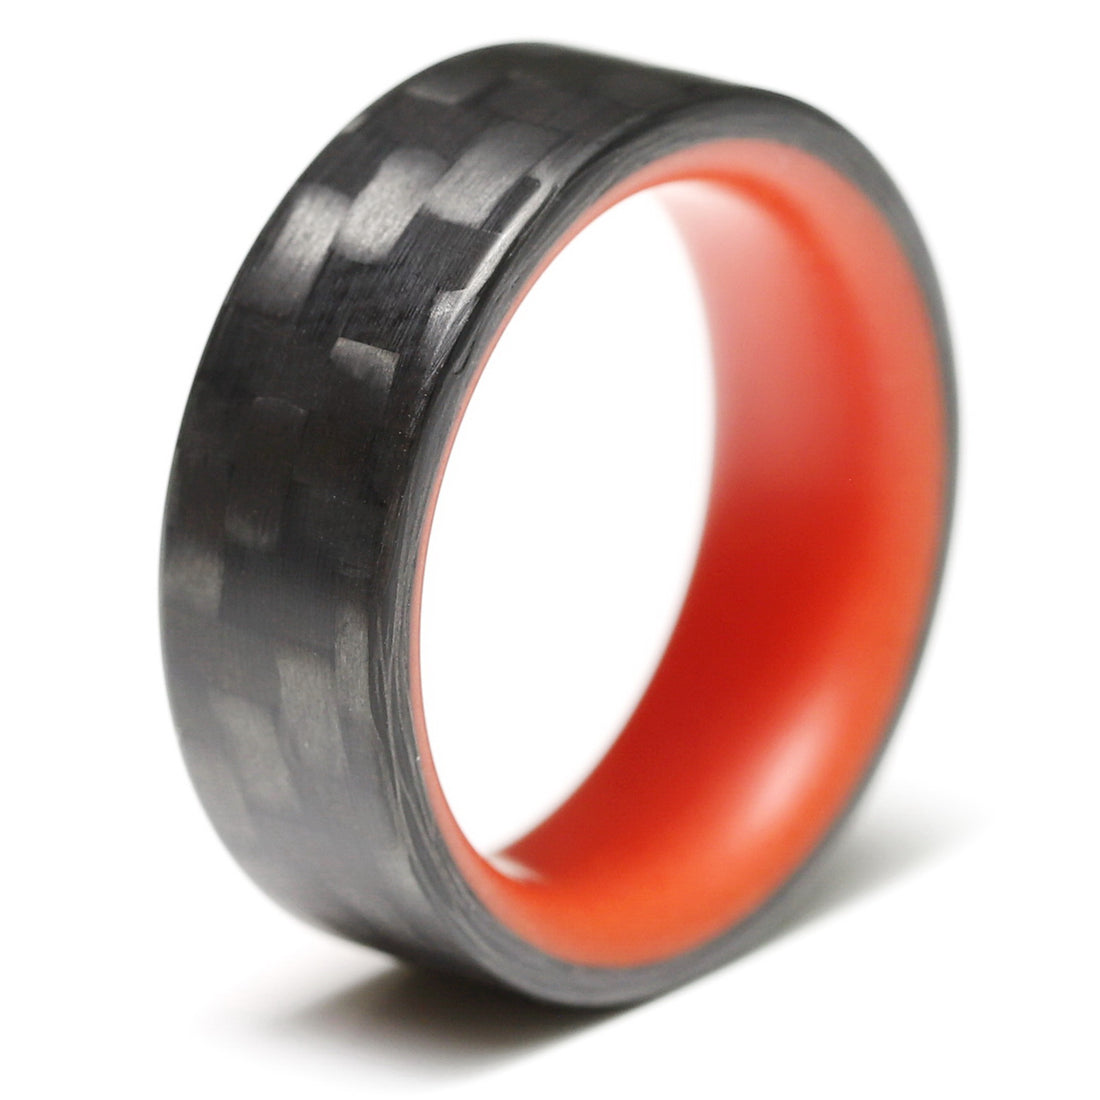 Red Glowing Ring with Carbon Fiber Close Up